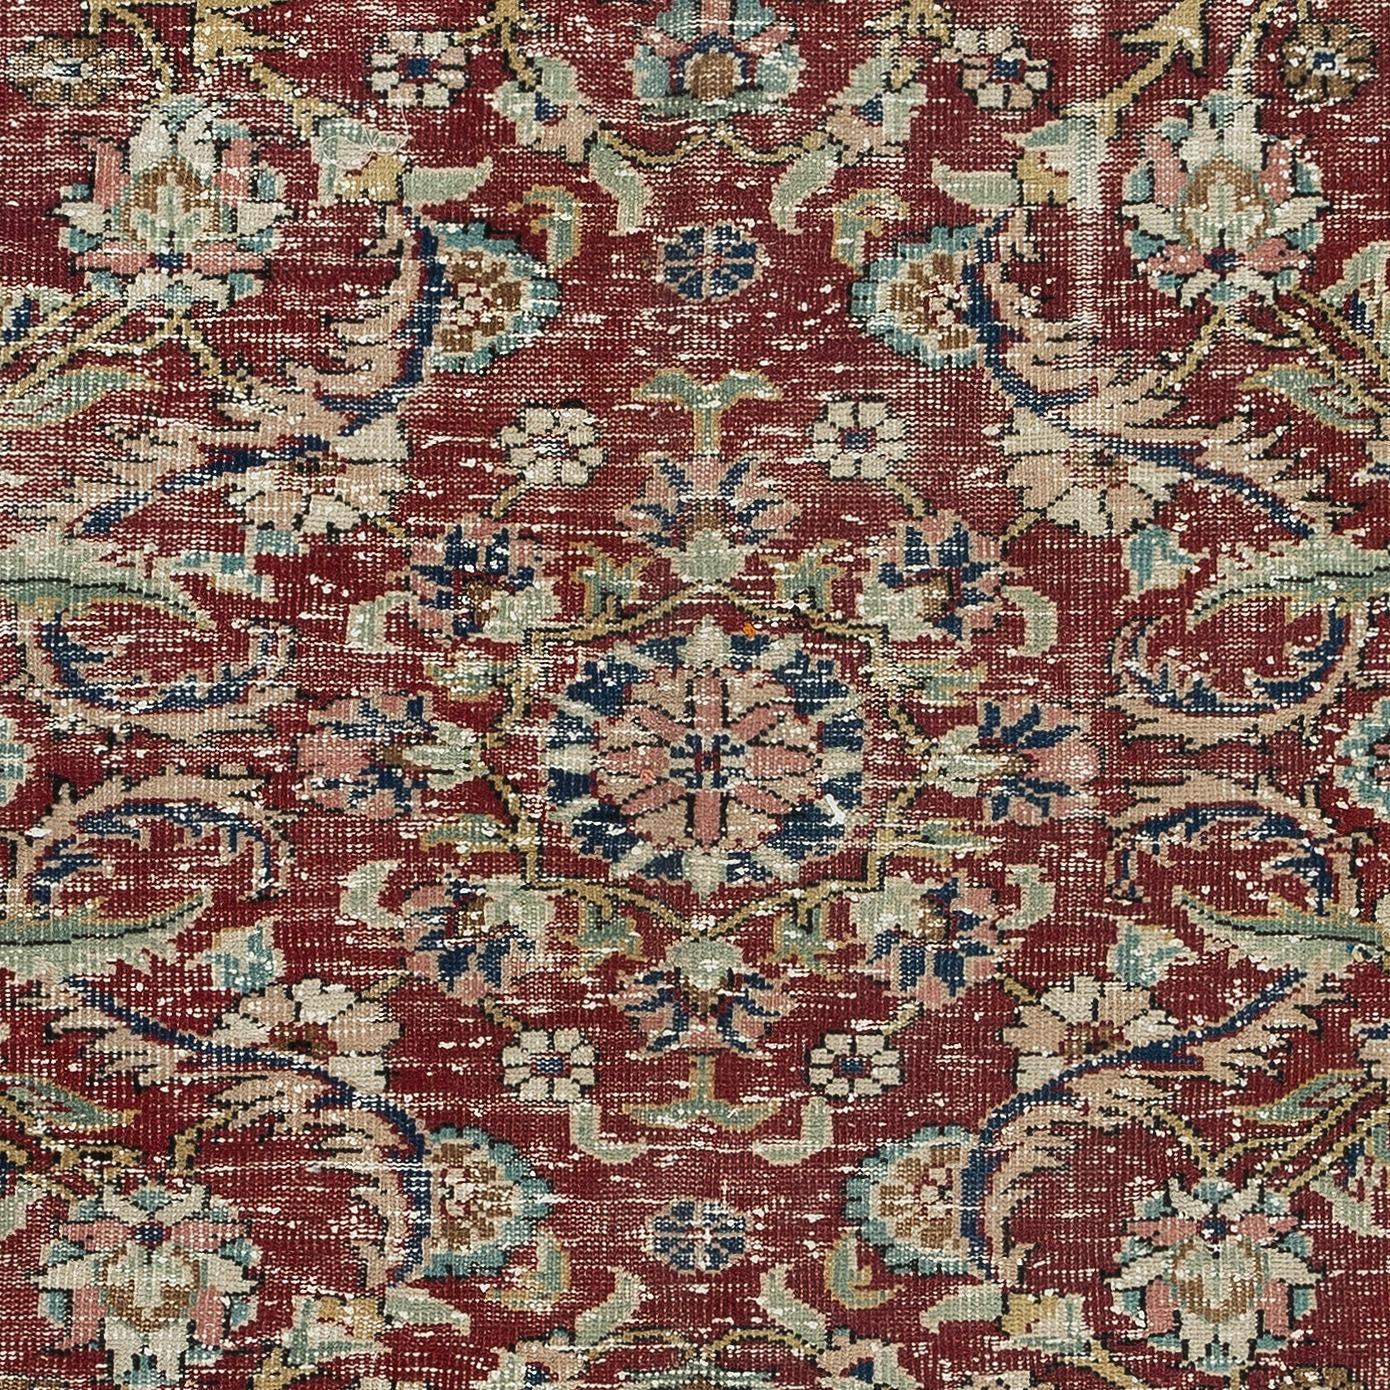 Hand-Woven 5.8x9 ft Handmade Turkish Rug with Flower Design, Traditional Carpet in Red For Sale